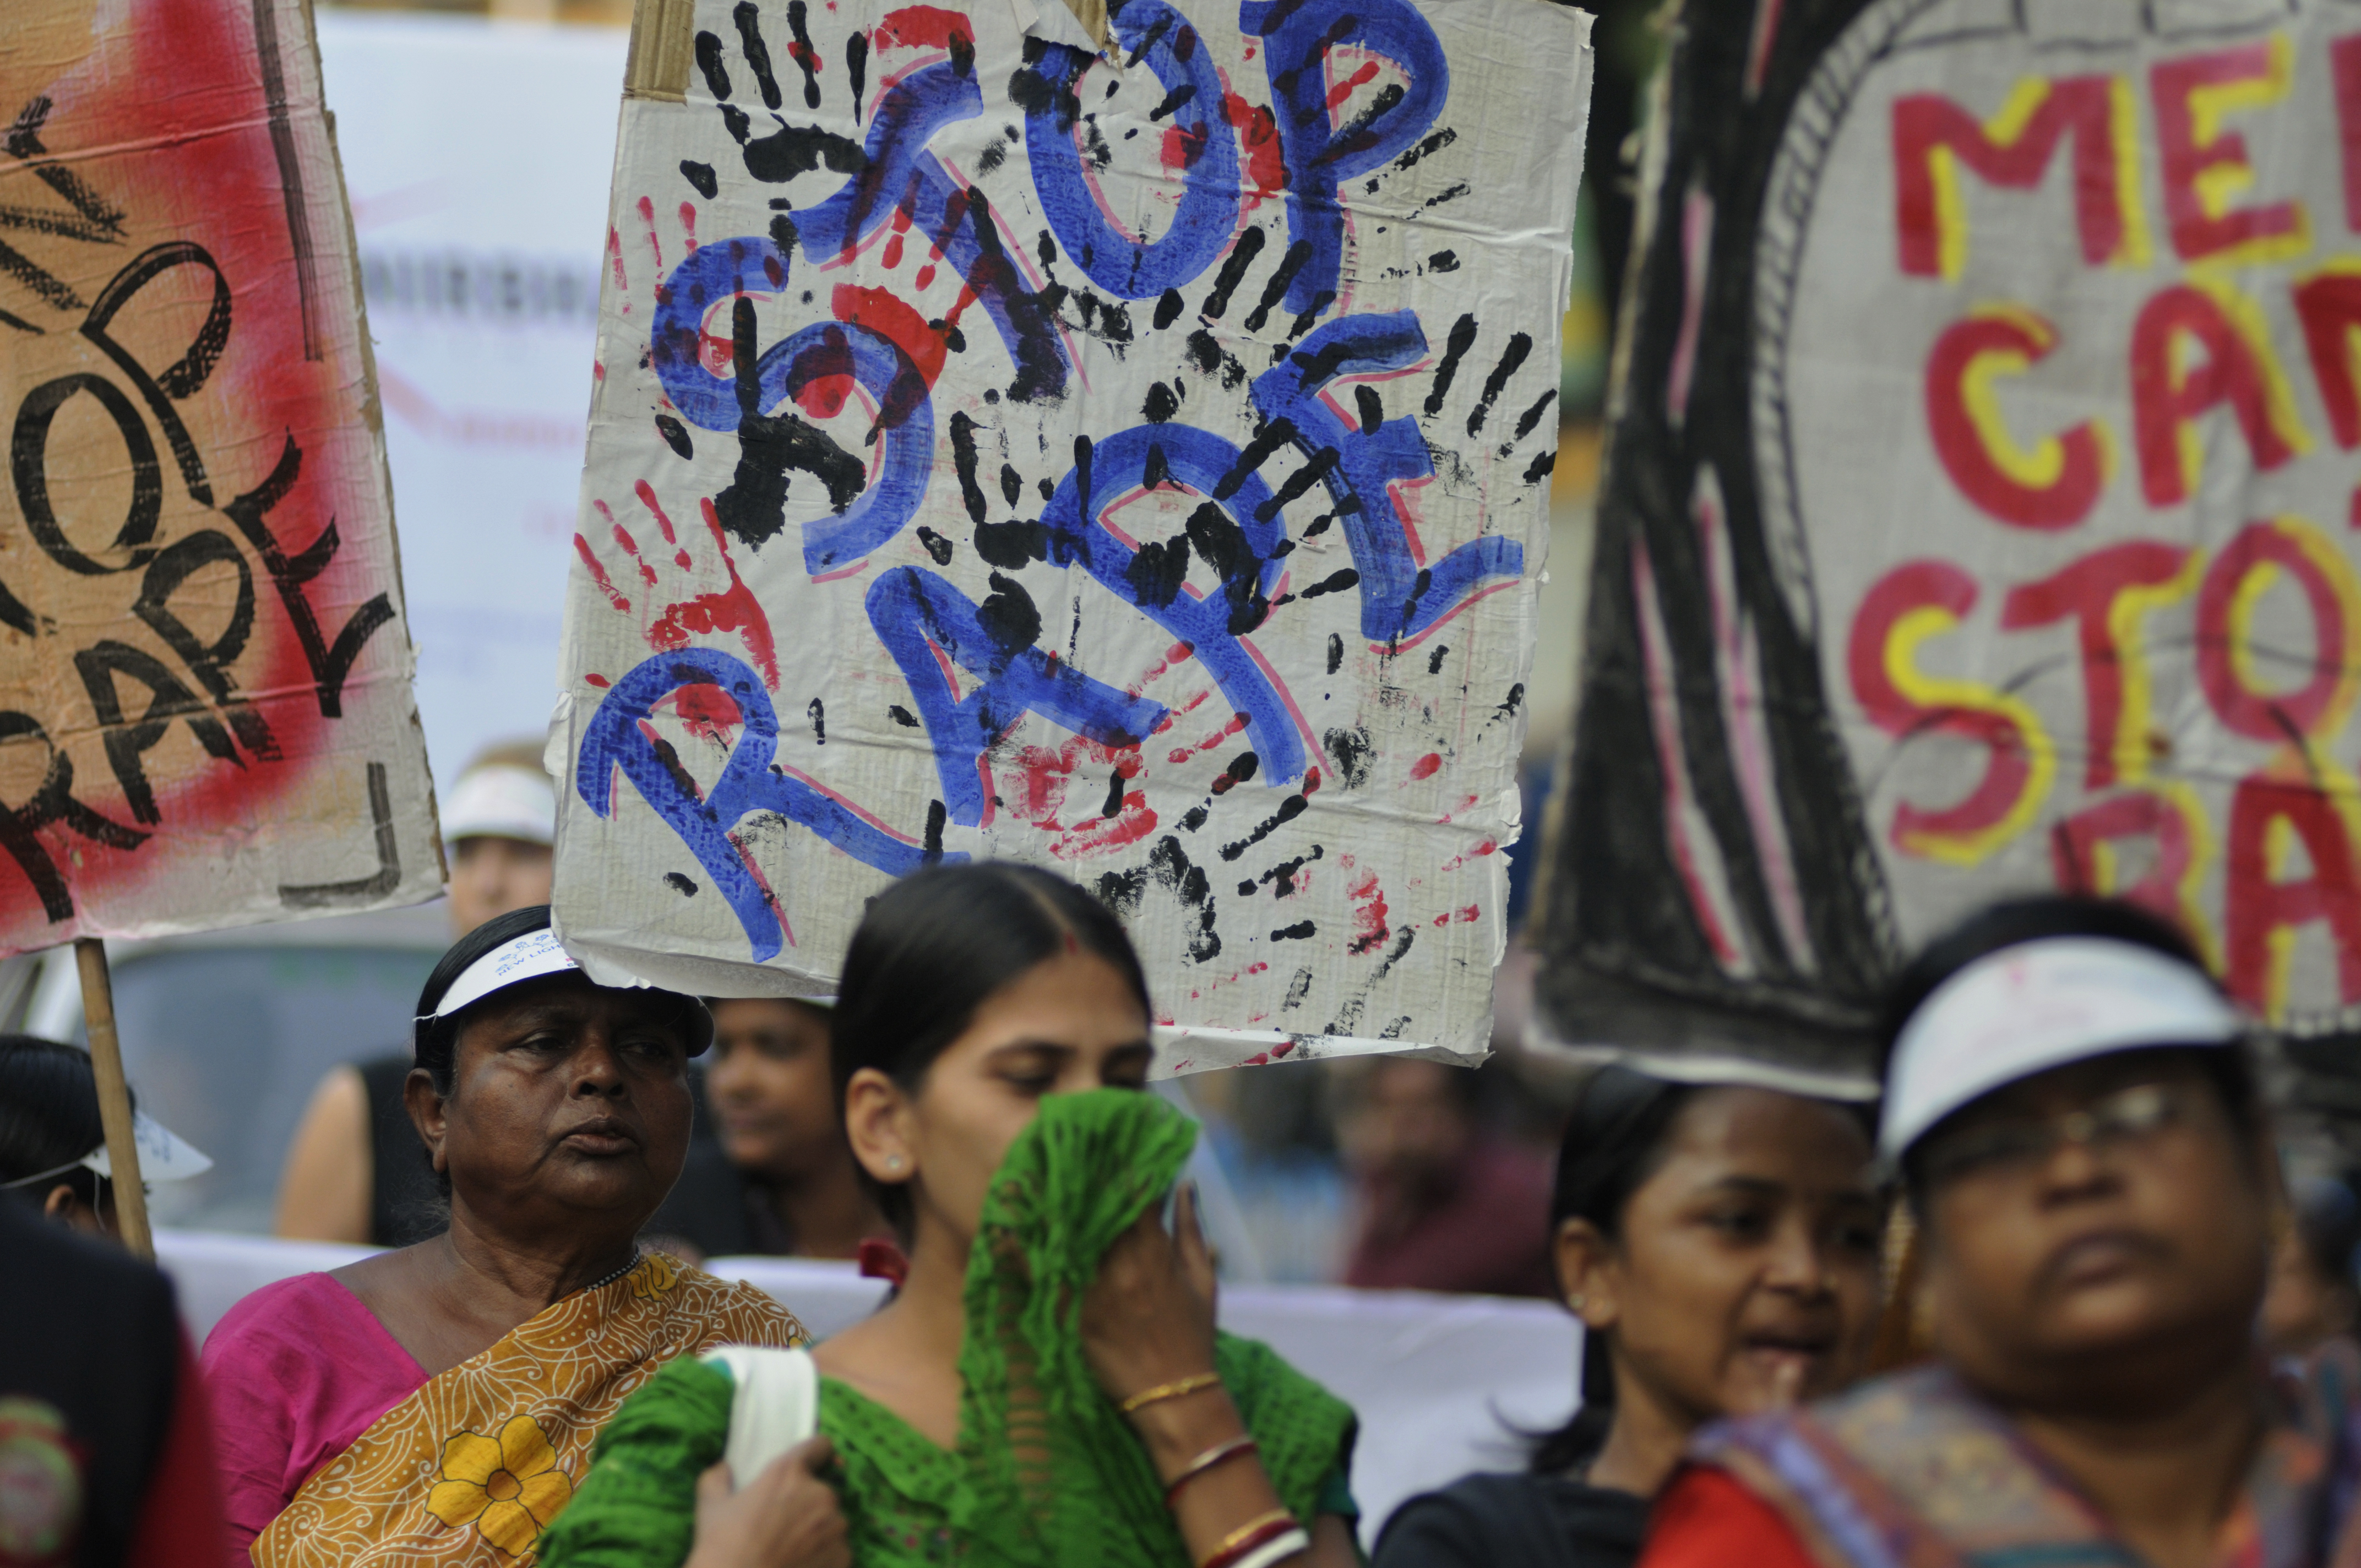 On 16 December 2012 in New Delhi, a 23-year-old female physiotherapy intern was beaten and gang raped in a private bus. (Arindam Shivaani—NurPhoto via Getty Images)